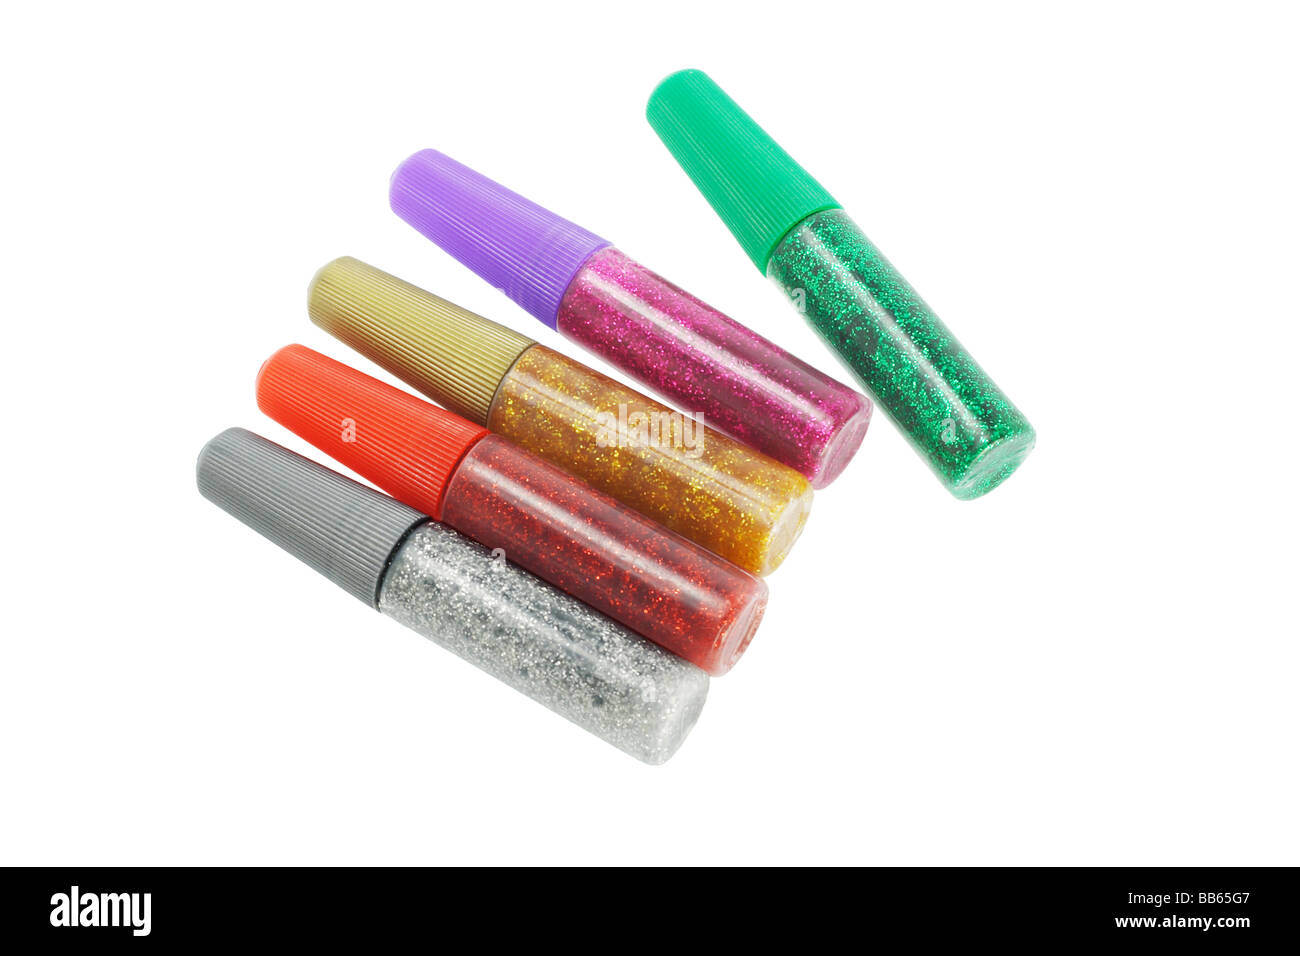 Five tubes of glitter glue of various colors on white background Stock Photo